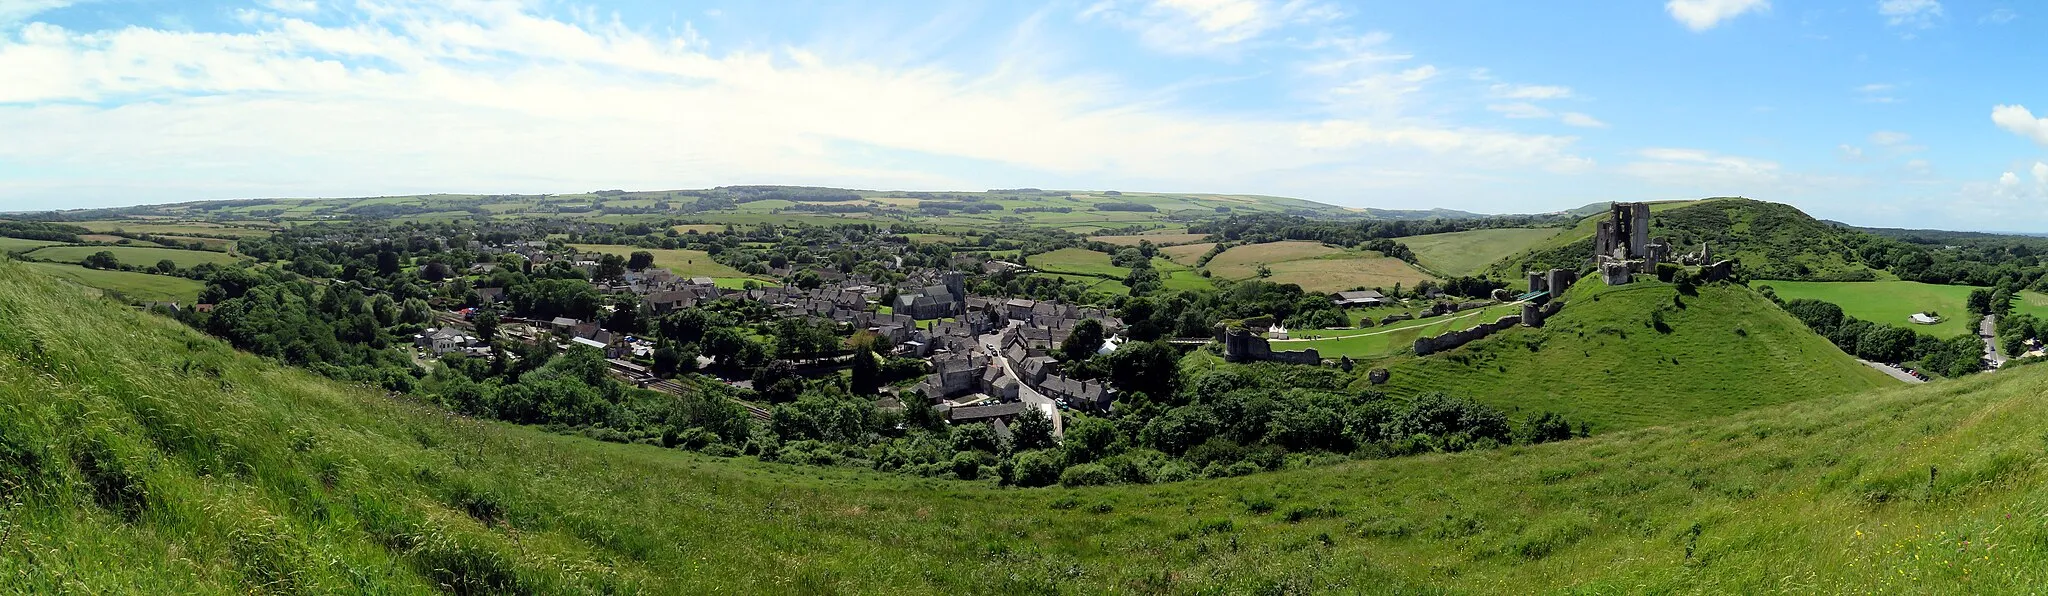 Photo showing: Panoramic image of the castle and village of Corfe Castle